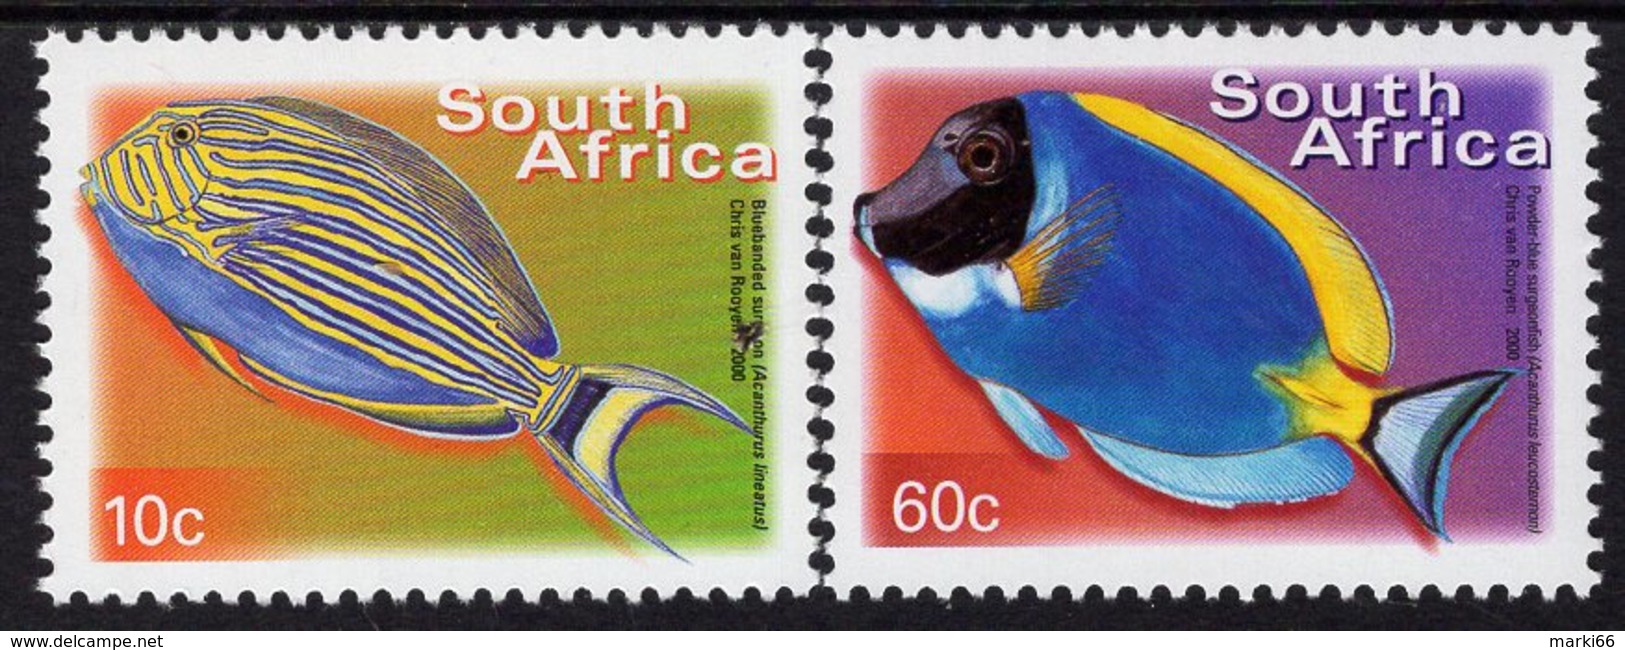 South Africa - 2014 - Colourful South Africa - Fish - 7th Definitive Series - Mint Stamp Set - Neufs